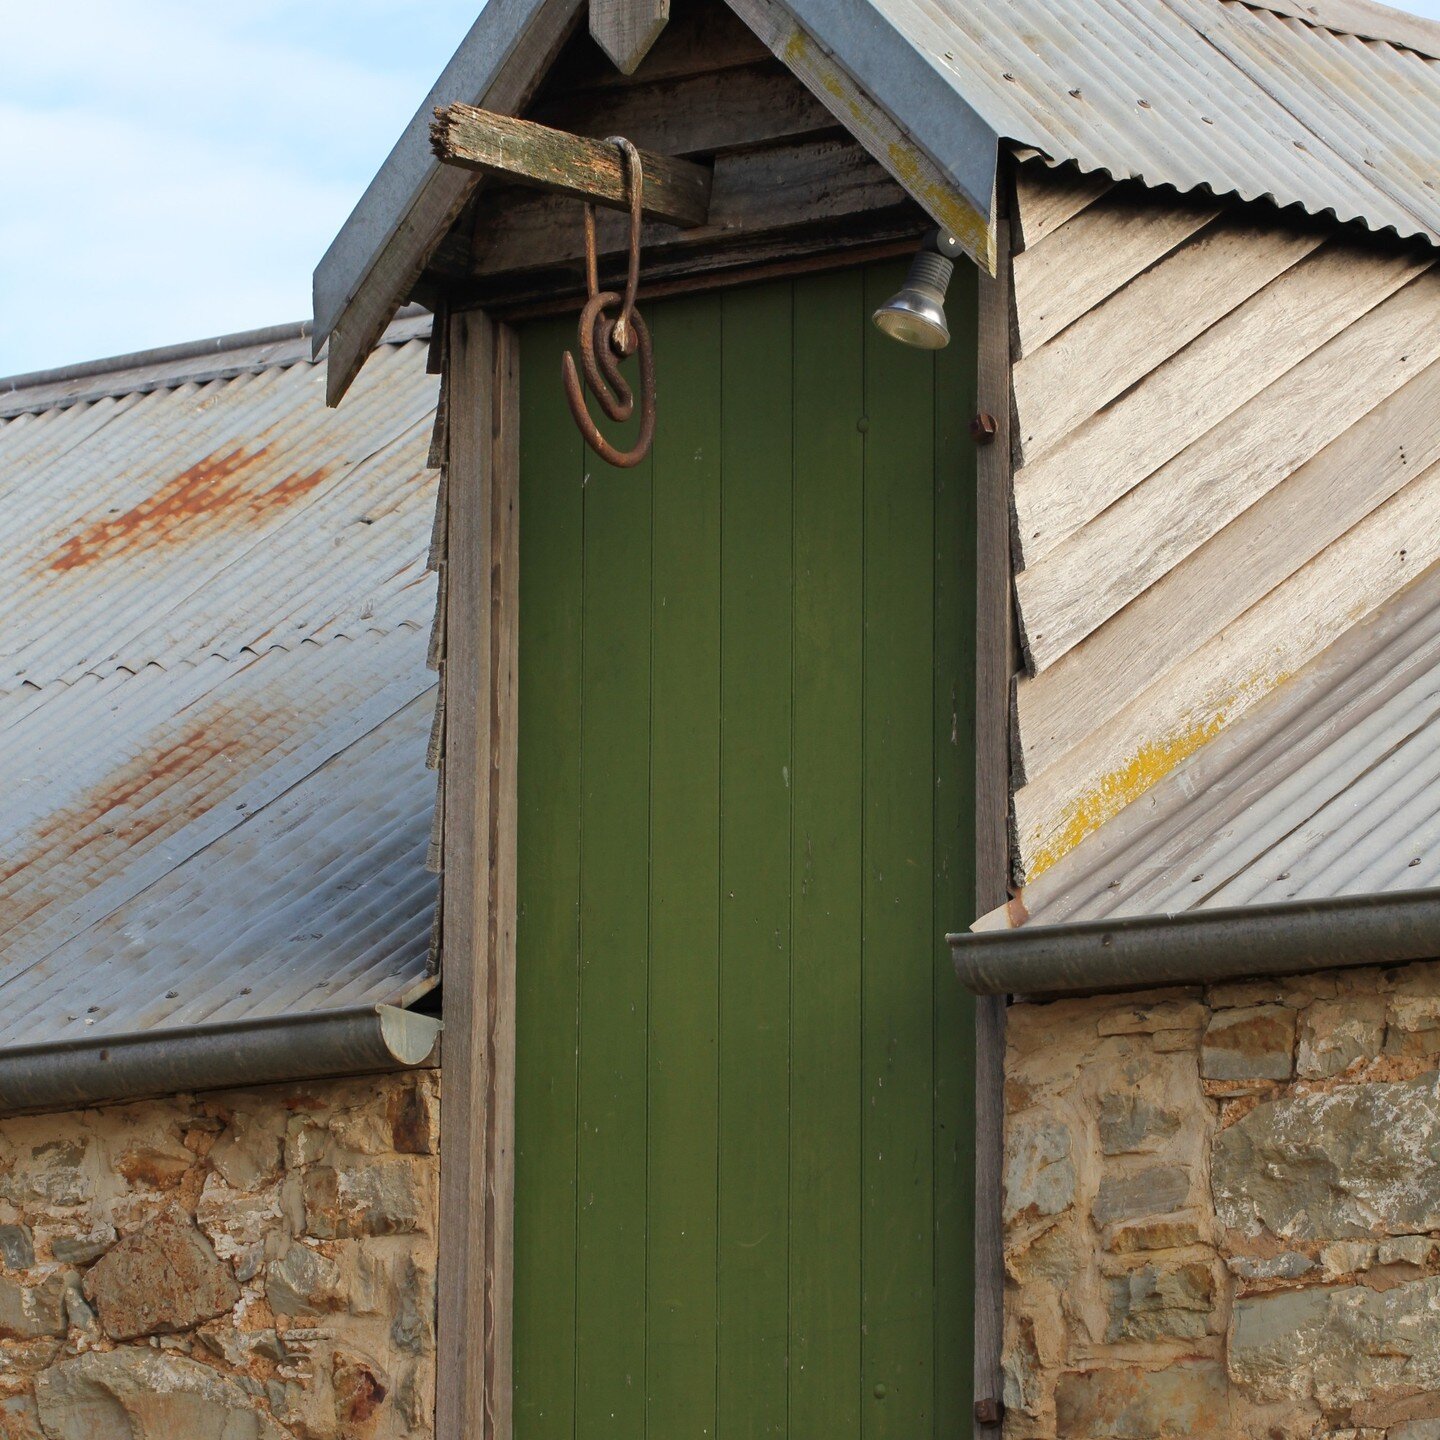 Reportedly the oldest building in Goulburn, this stone stable, was built by Matt Healey. He arrived in NSW on board the &lsquo;Guildford&rsquo; in 1818 after being tried in Dublin for &ldquo;robbing his master&rdquo; and sentenced to seven years. Mat